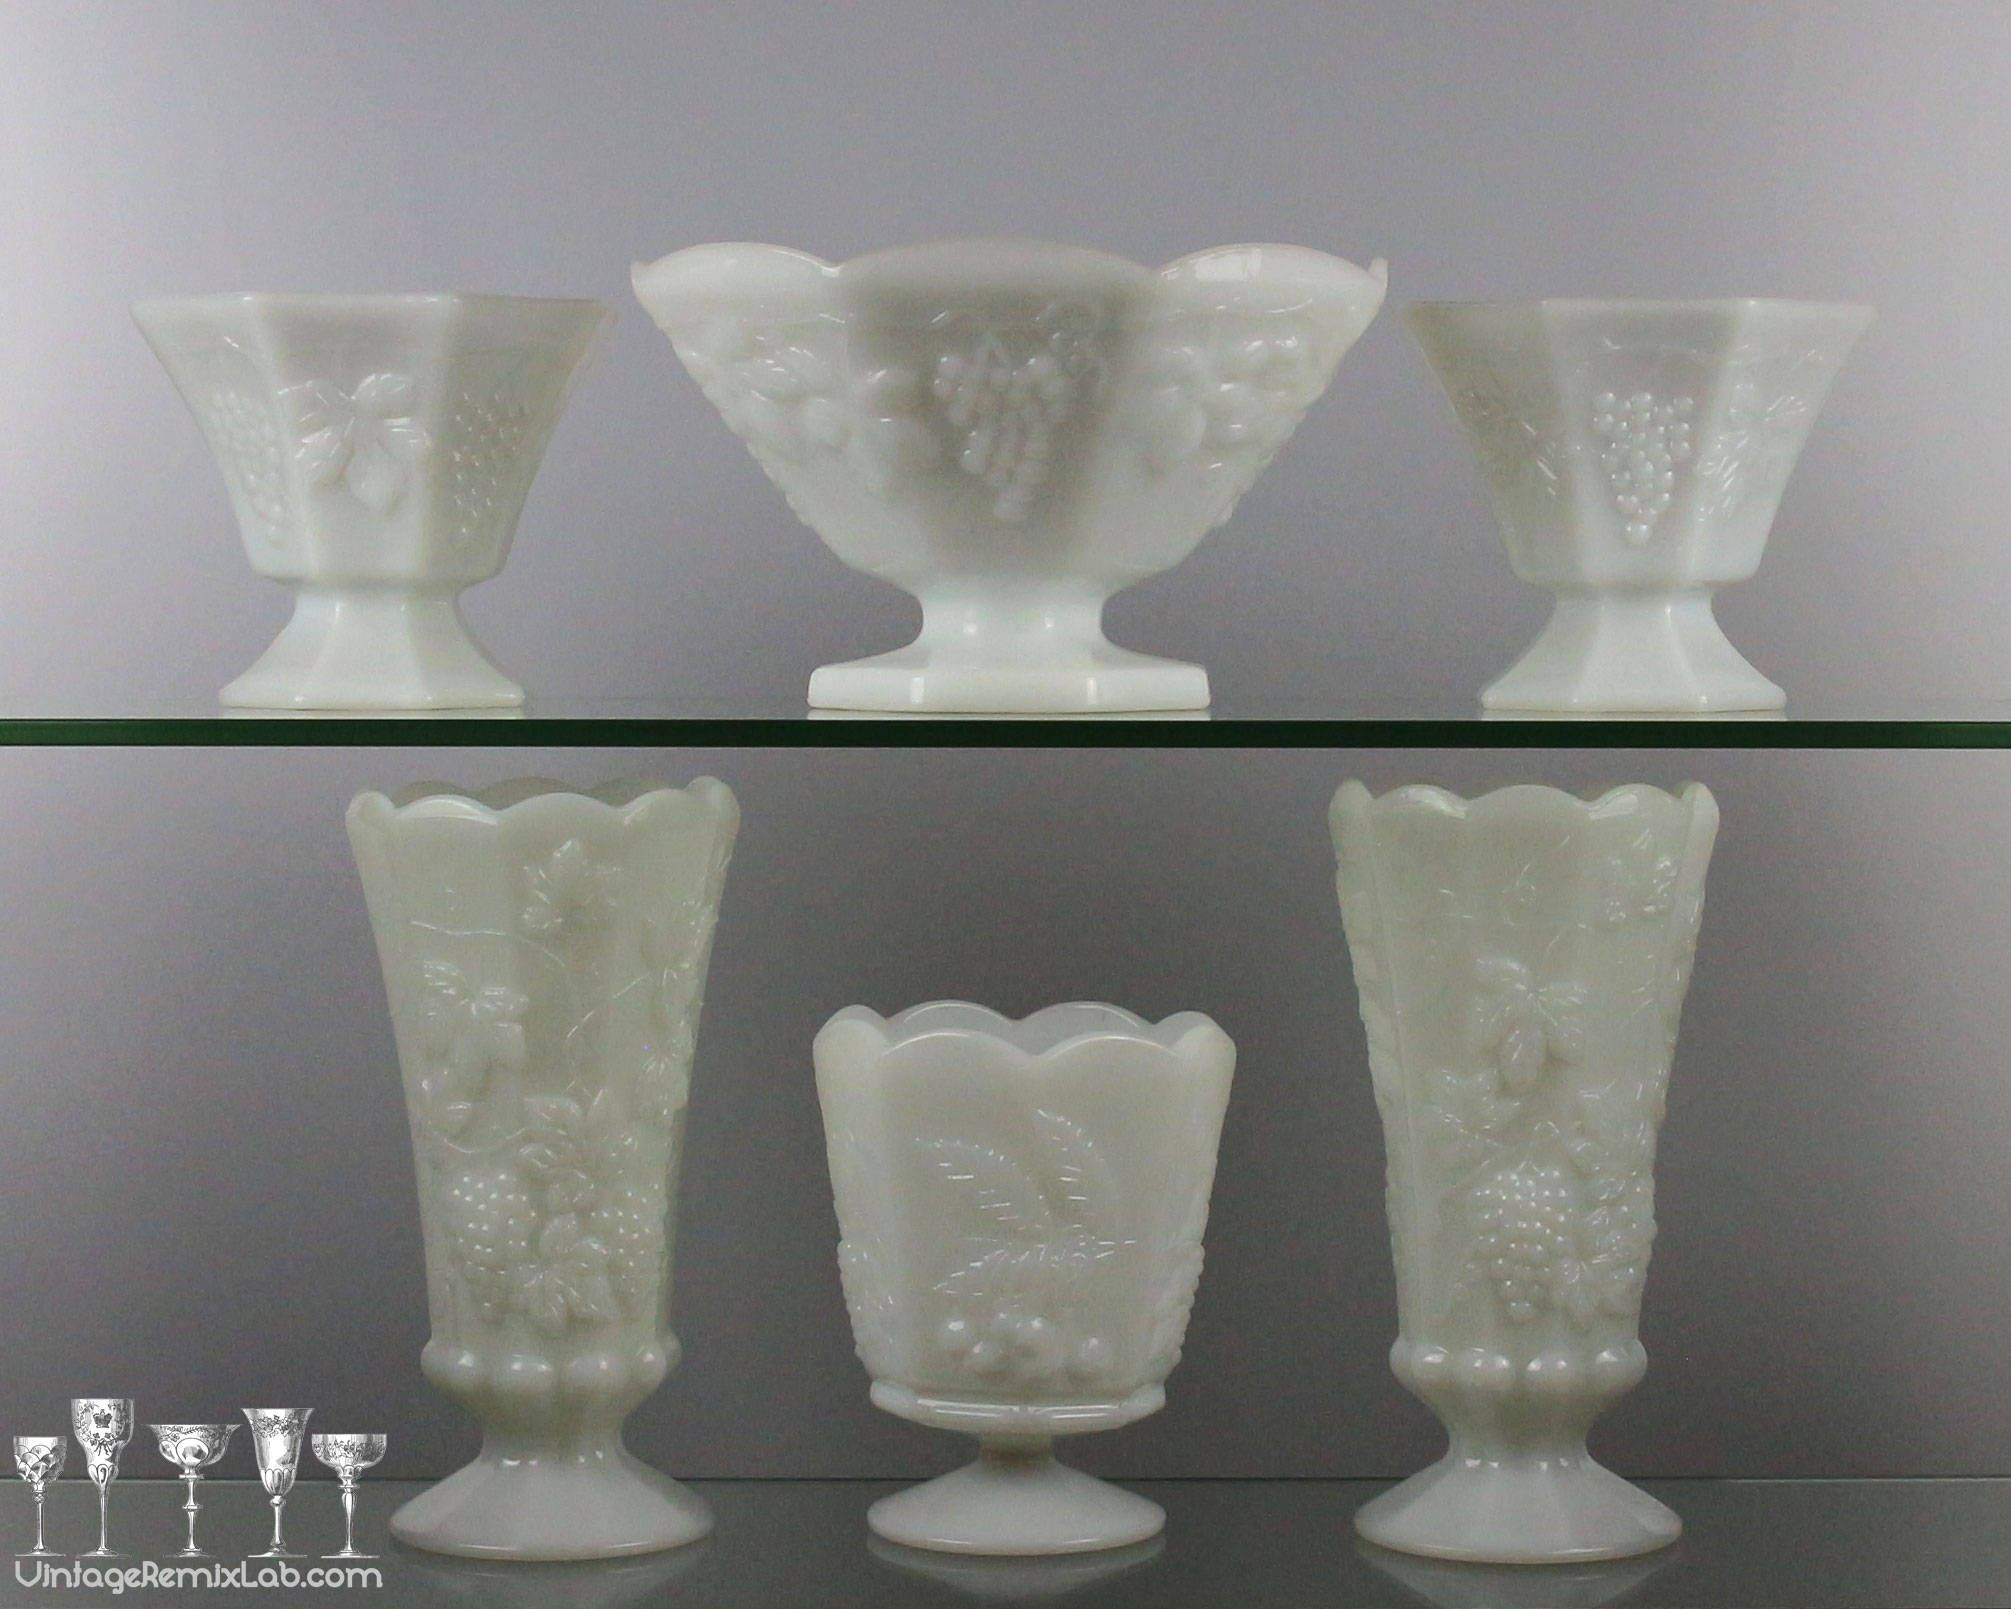 19 Awesome Set Of Small Glass Vases 2024 free download set of small glass vases of vintage 1950s milk glass pedestal vases e280a2 paneled grape design by pertaining to excited to share the latest addition to my etsy shop vintage 1950s milk glass